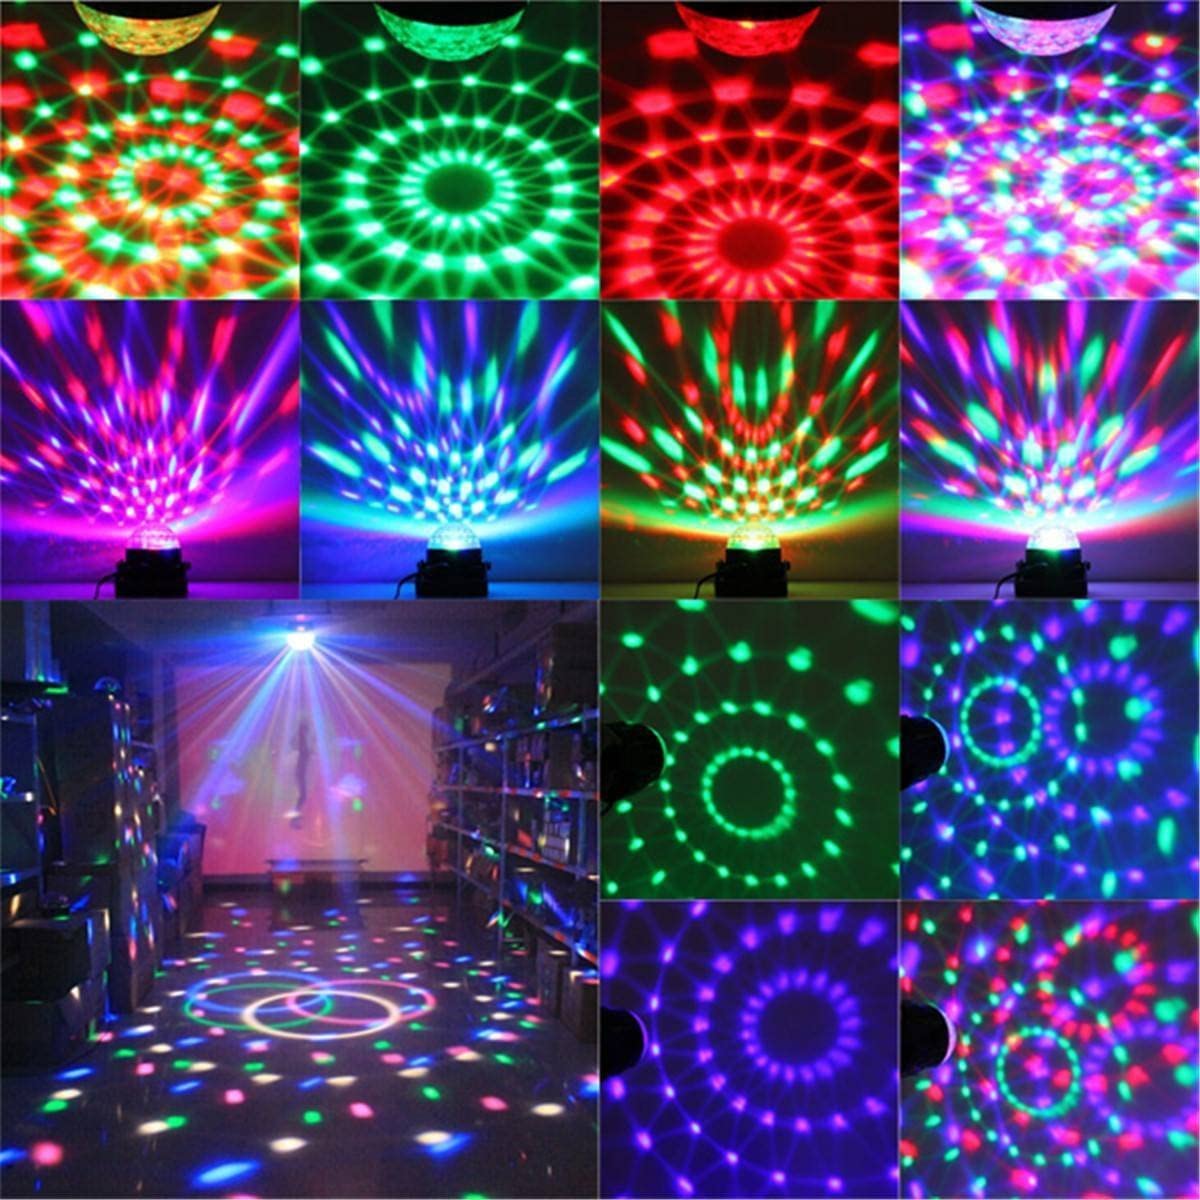 Sound Activated Party Lights 7 Modes Stage Par Light for Home Room Dance Parties Birthday DJ Bar Karaoke Xmas Wedding Show Club Pub